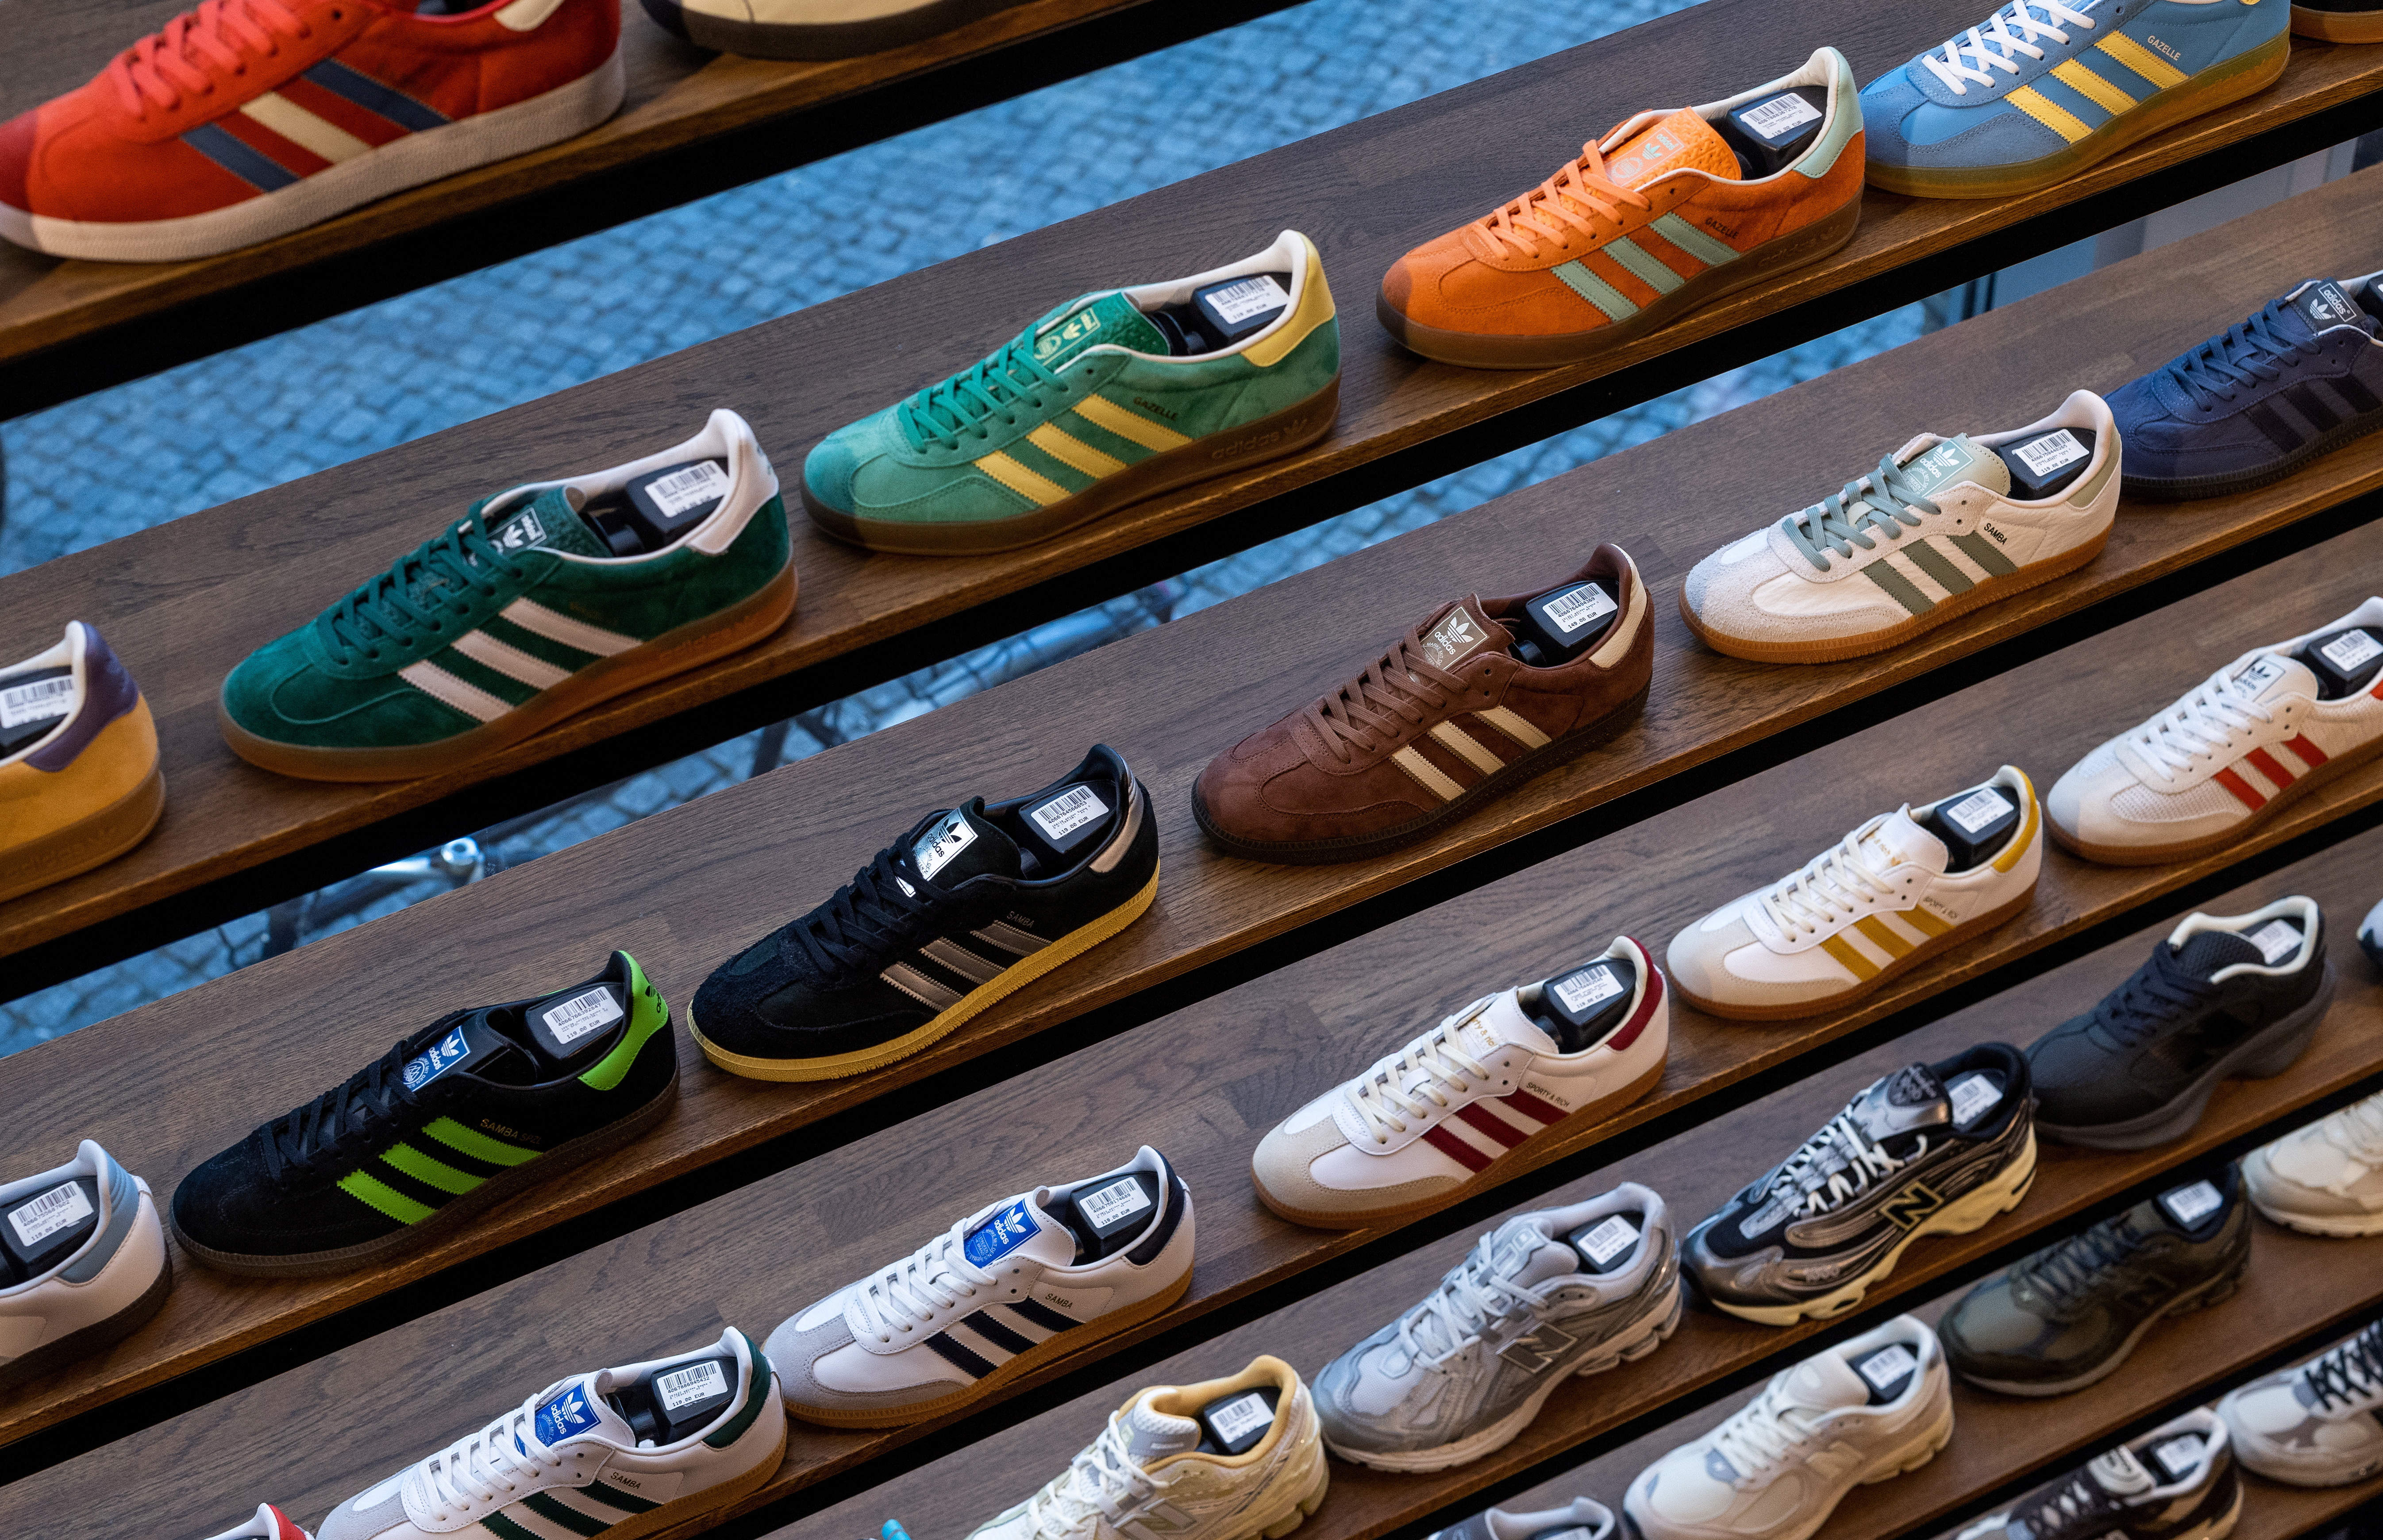 Adidas sneakers for sale at a shop in Berlin